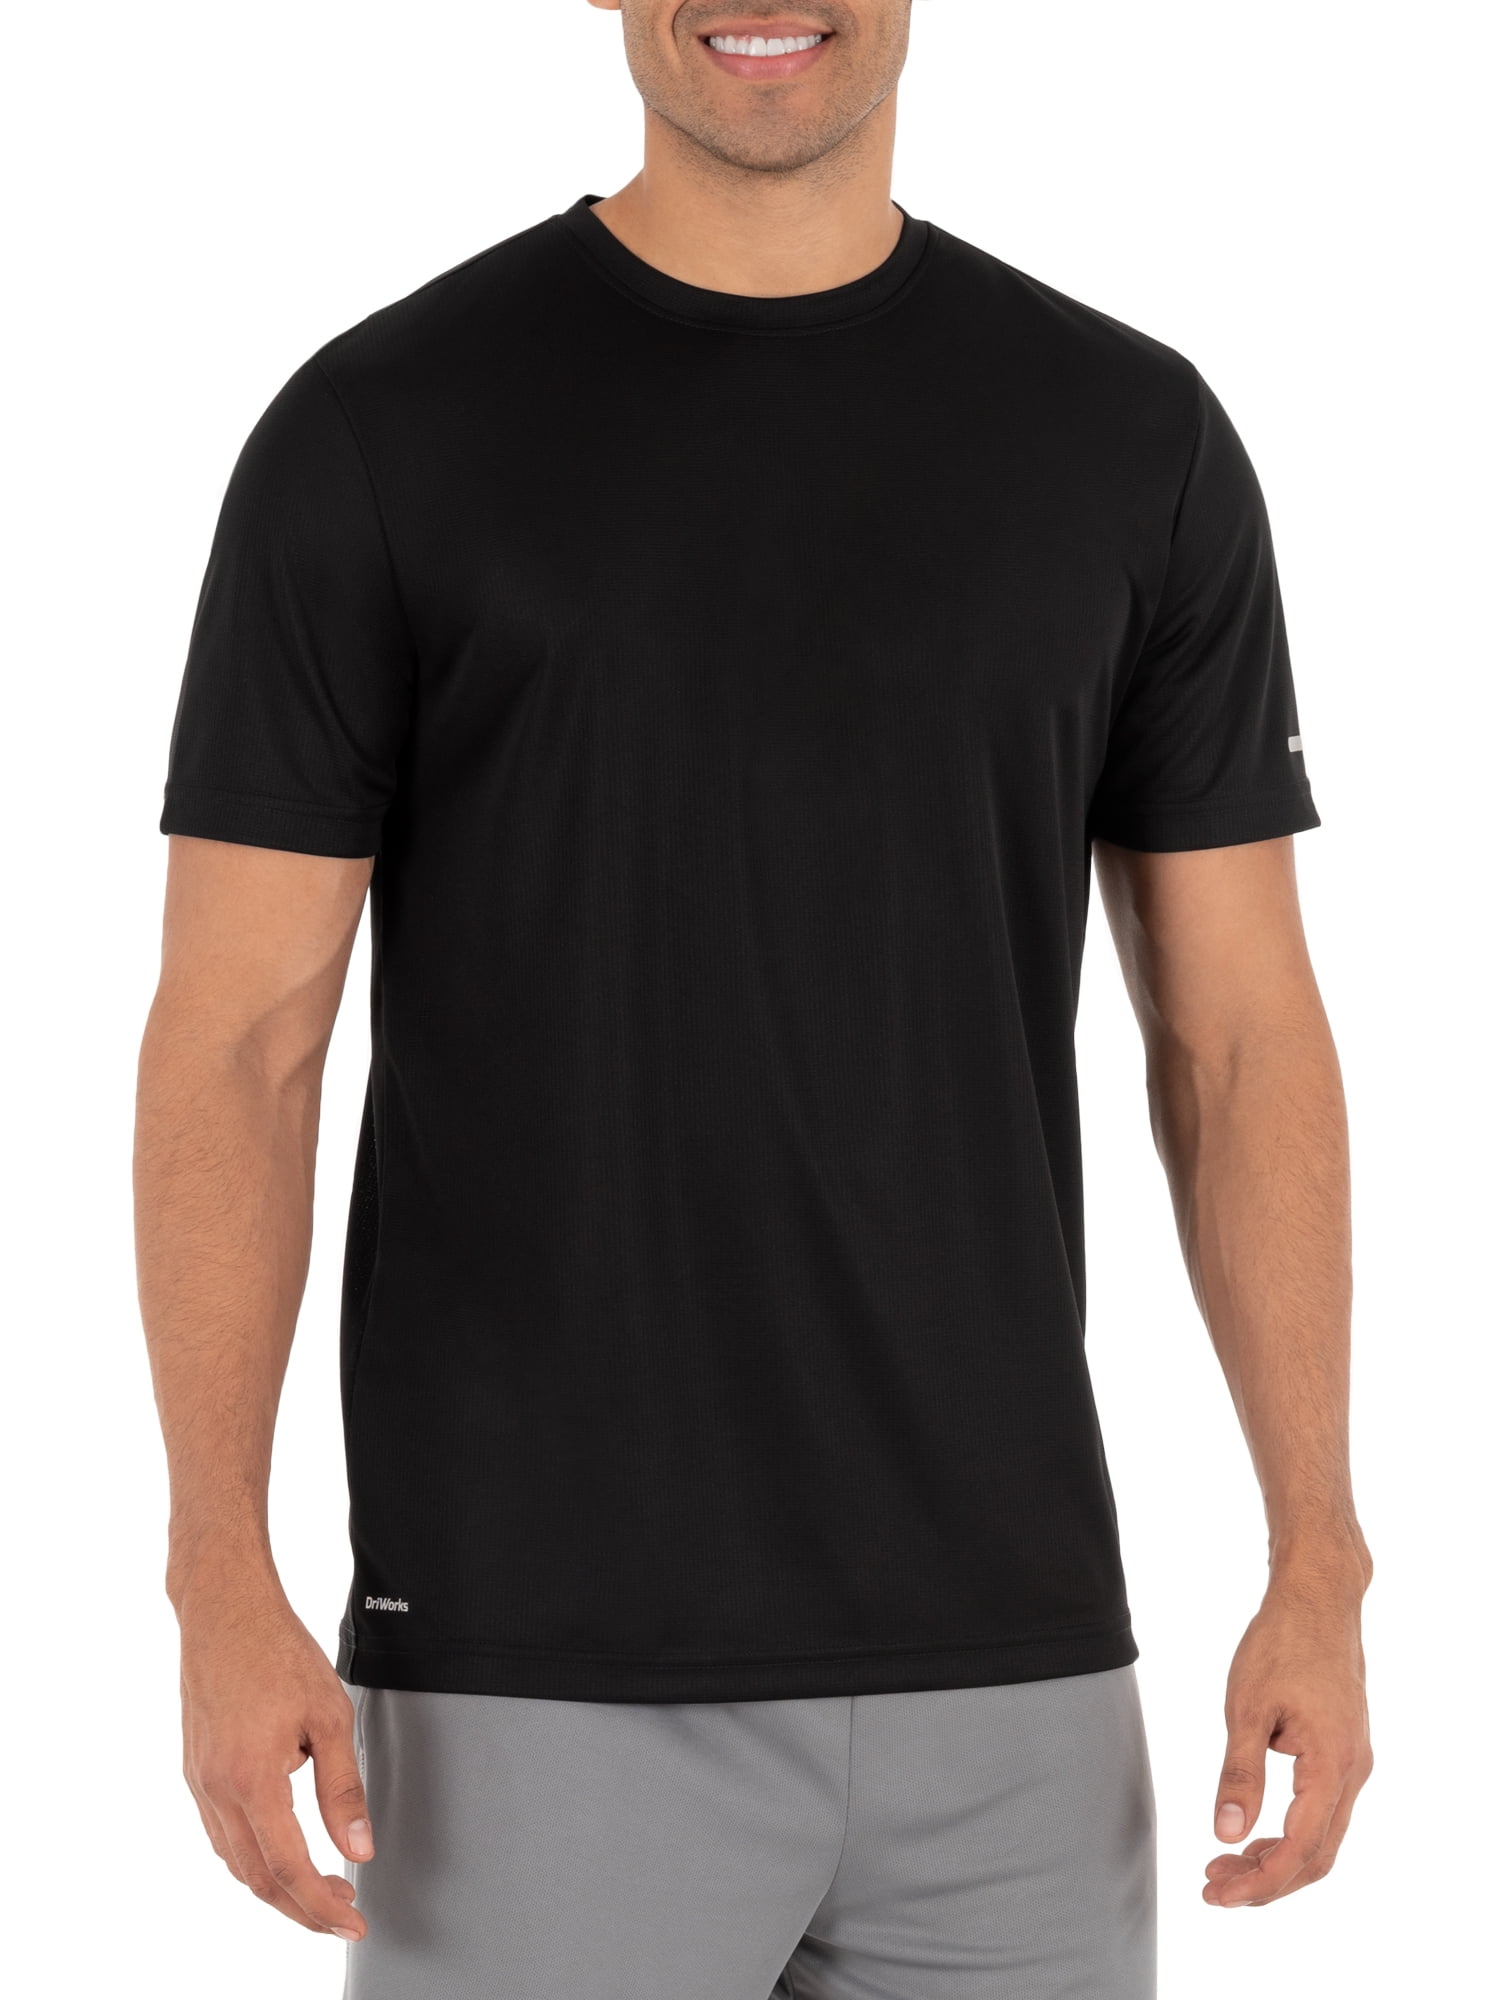 Athletic Works Men's and Big Men's Core Quick Dry Short Sleeve T-Shirt ...